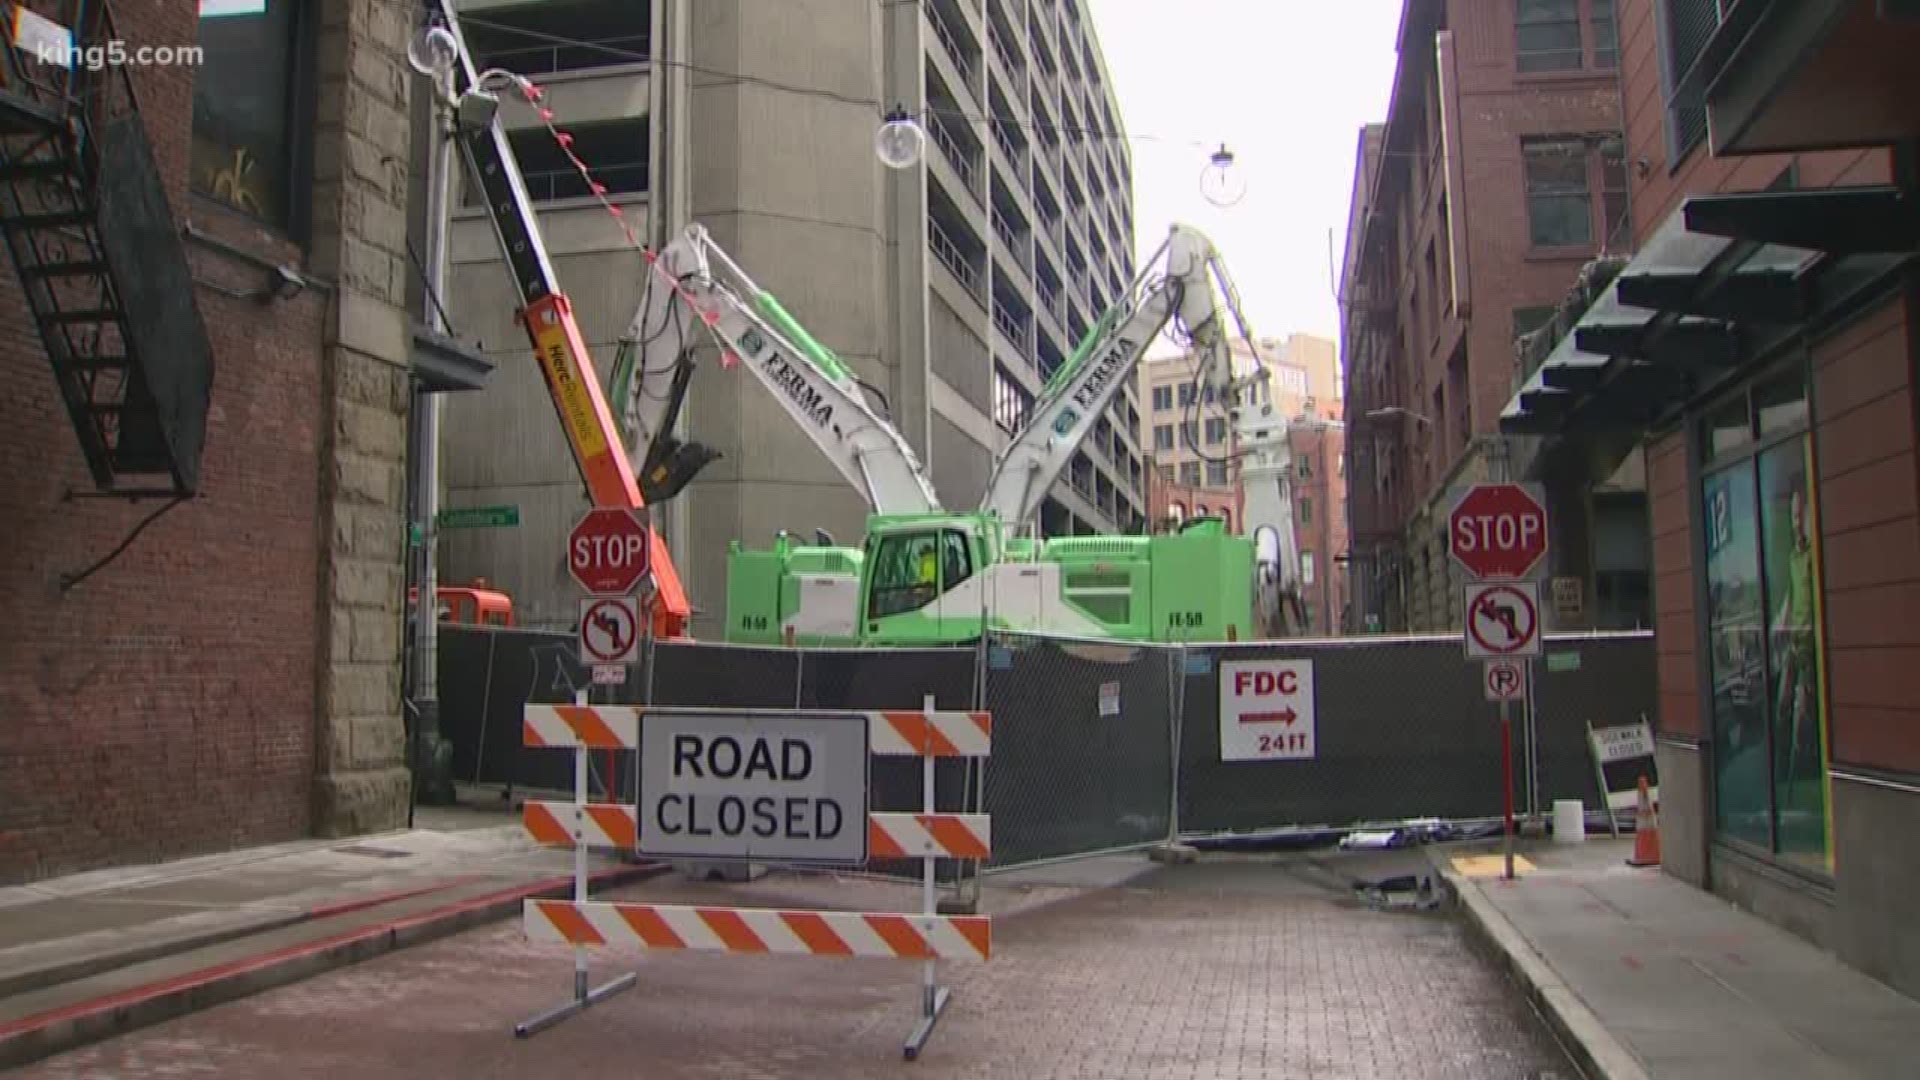 Workers are making progress with the viaduct demolition that is expected to take several months to complete. KING 5's Glenn Farley has a look at what's going on.